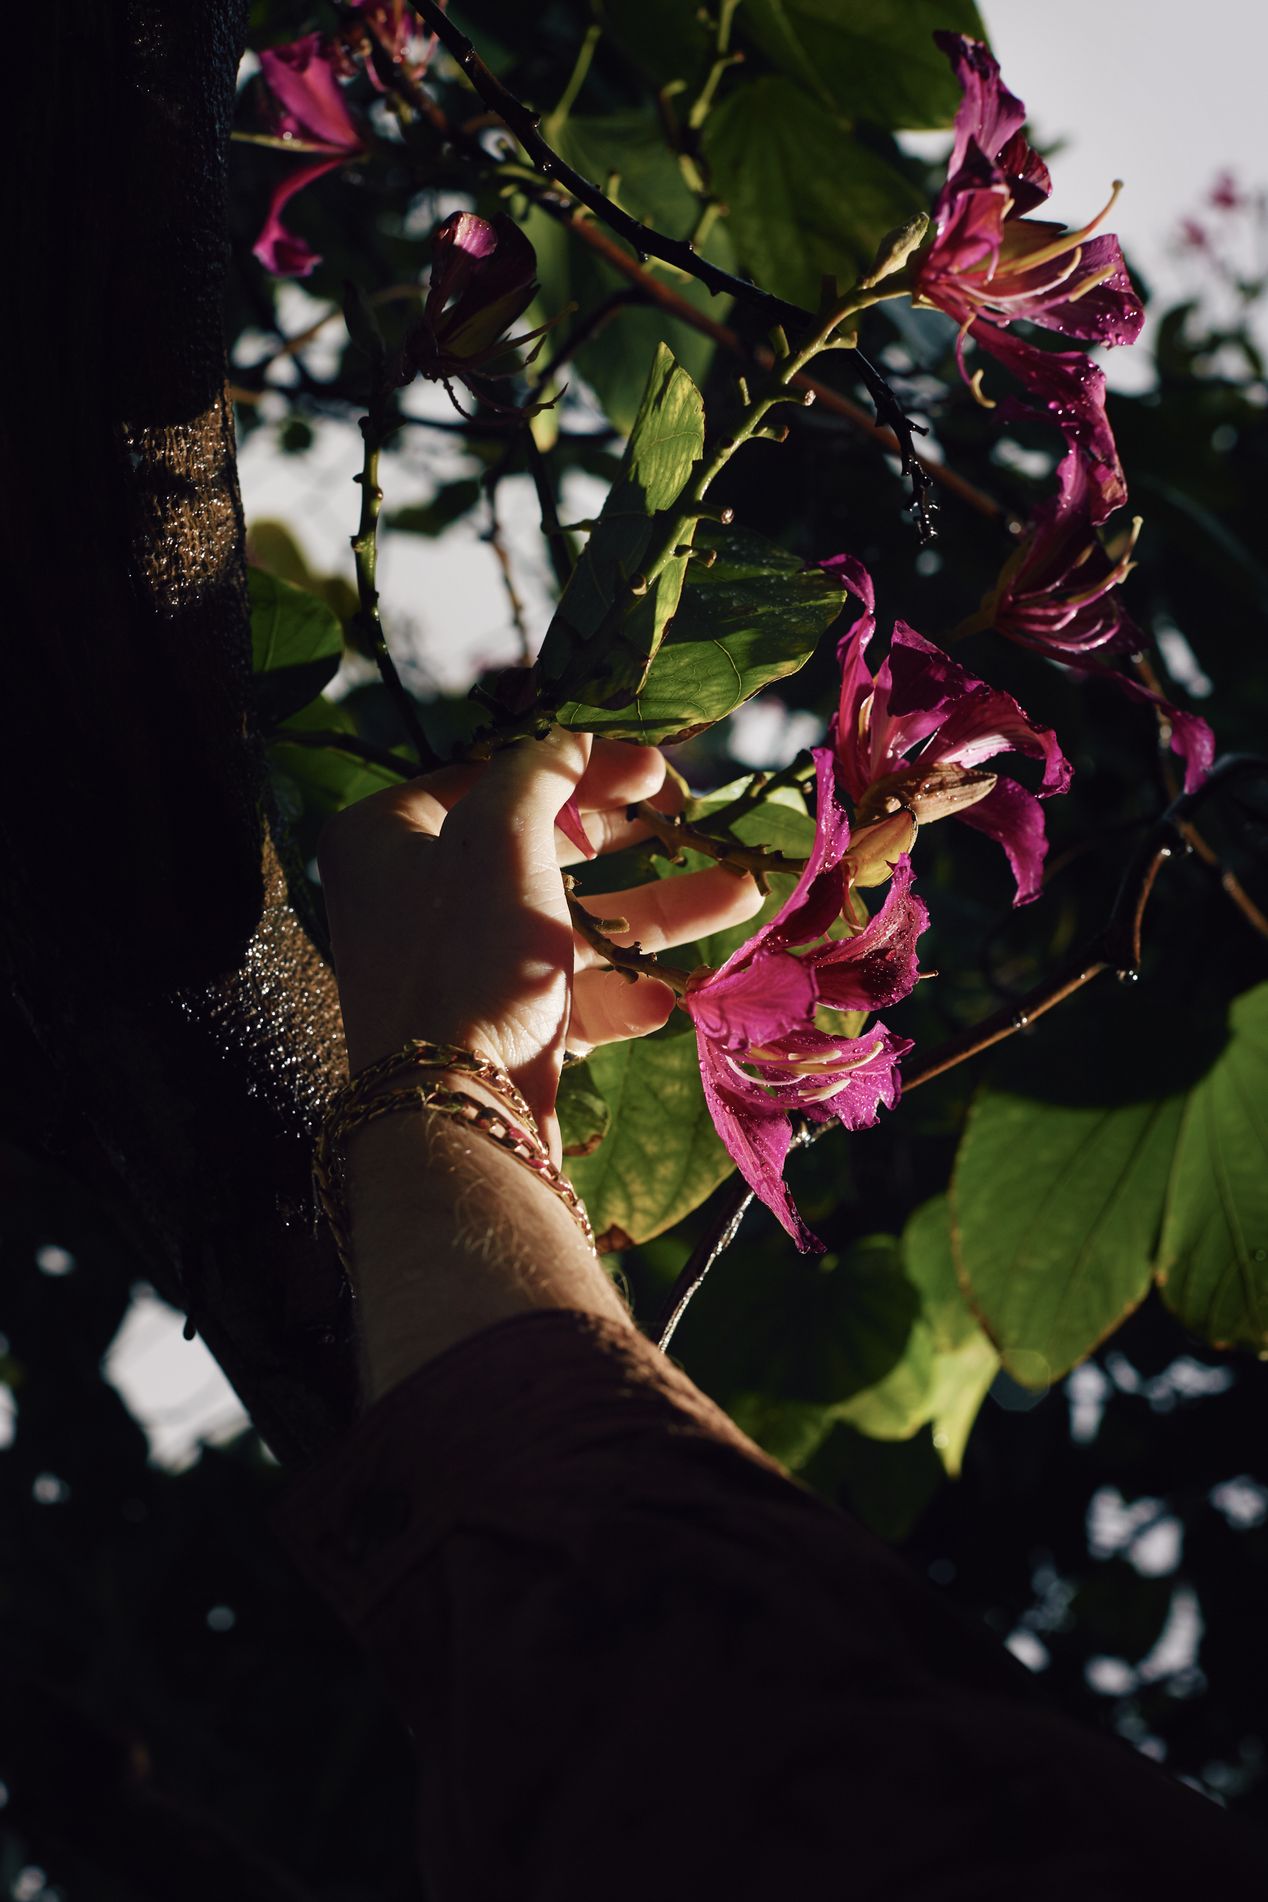 A hand reaching for a blooming pink flower, Ilona Szwarc, Los Angeles editorial photographer.